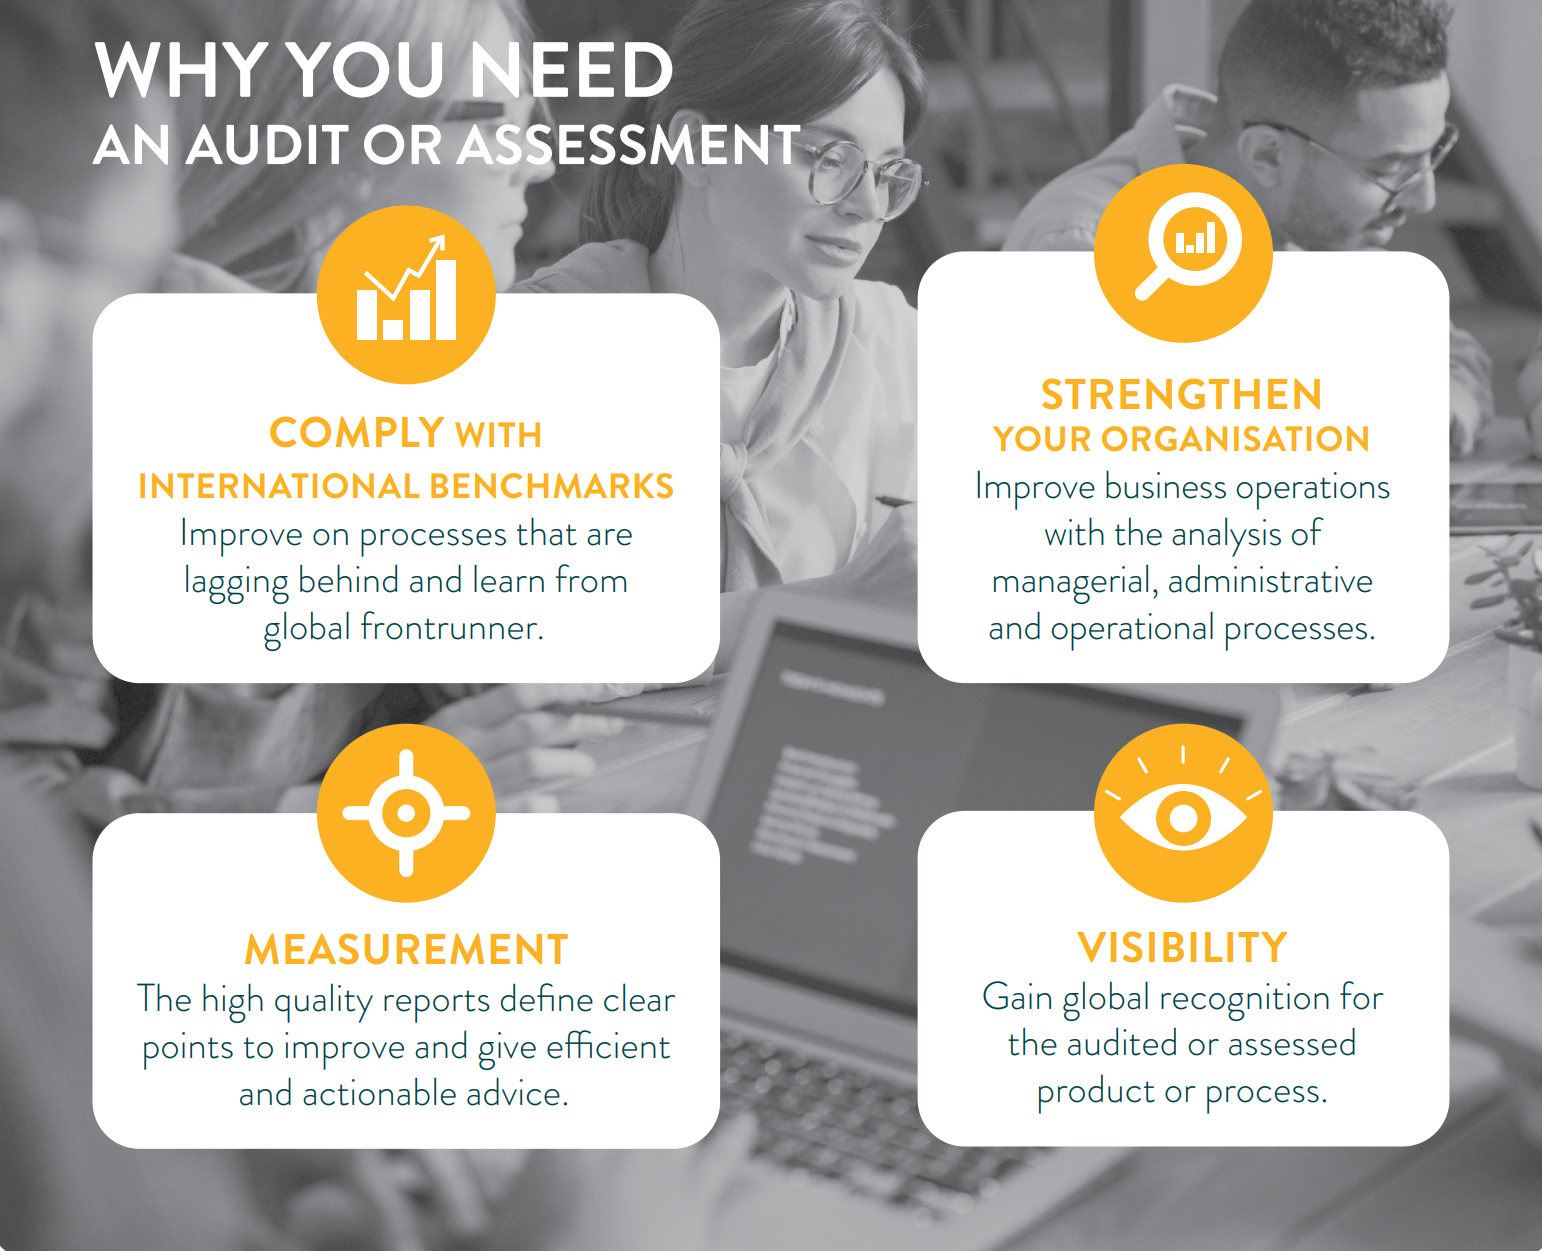 Why you need an audit or assessment, 1. Comply with International Benchmarks and improve on processes that are lagging behind and learn from global frontrunner. 2. Strengthen your organisation and improve business operations with the analysis of managerial, administrative and operational processes. 3. Measurement, the high quality reports define clear points to improve and give efficient and actionable advice. 4. Visibility and gain global recognition for the audited or assessed product or process.